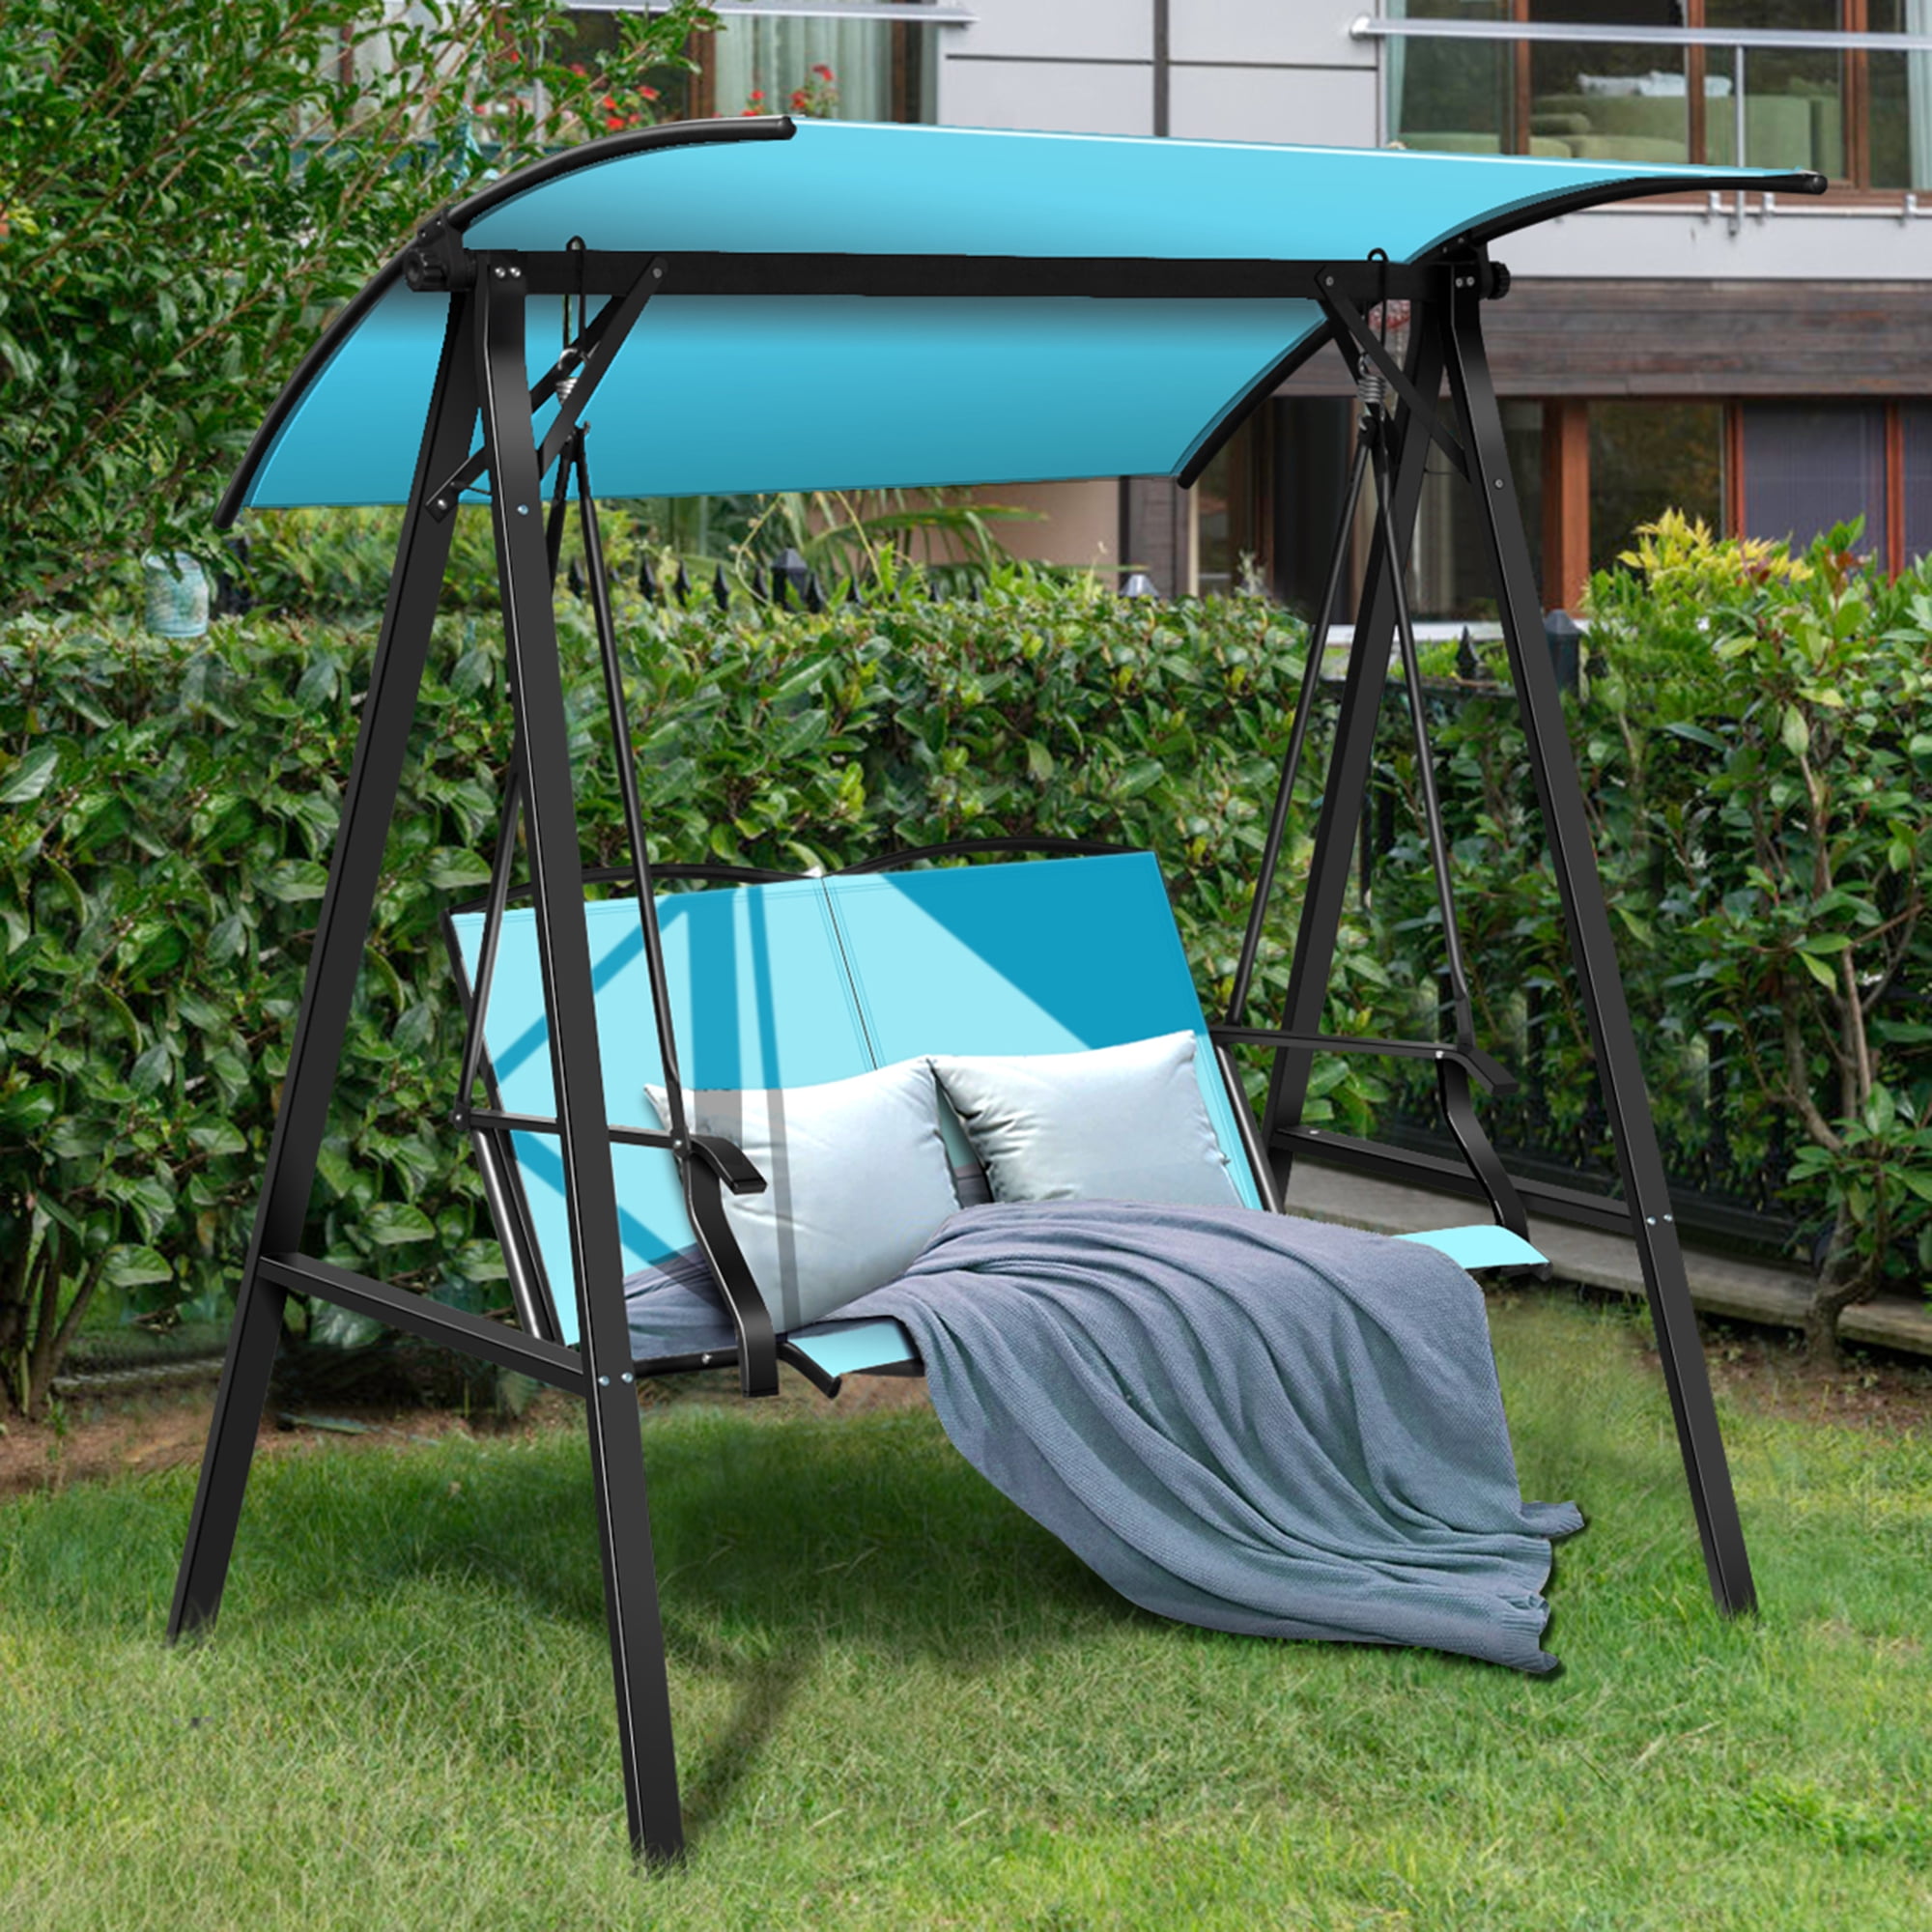 Gymax Patio Canopy Swing Outdoor Swing Chair 2 Person Canopy Hammock Turquoise Walmart Canada